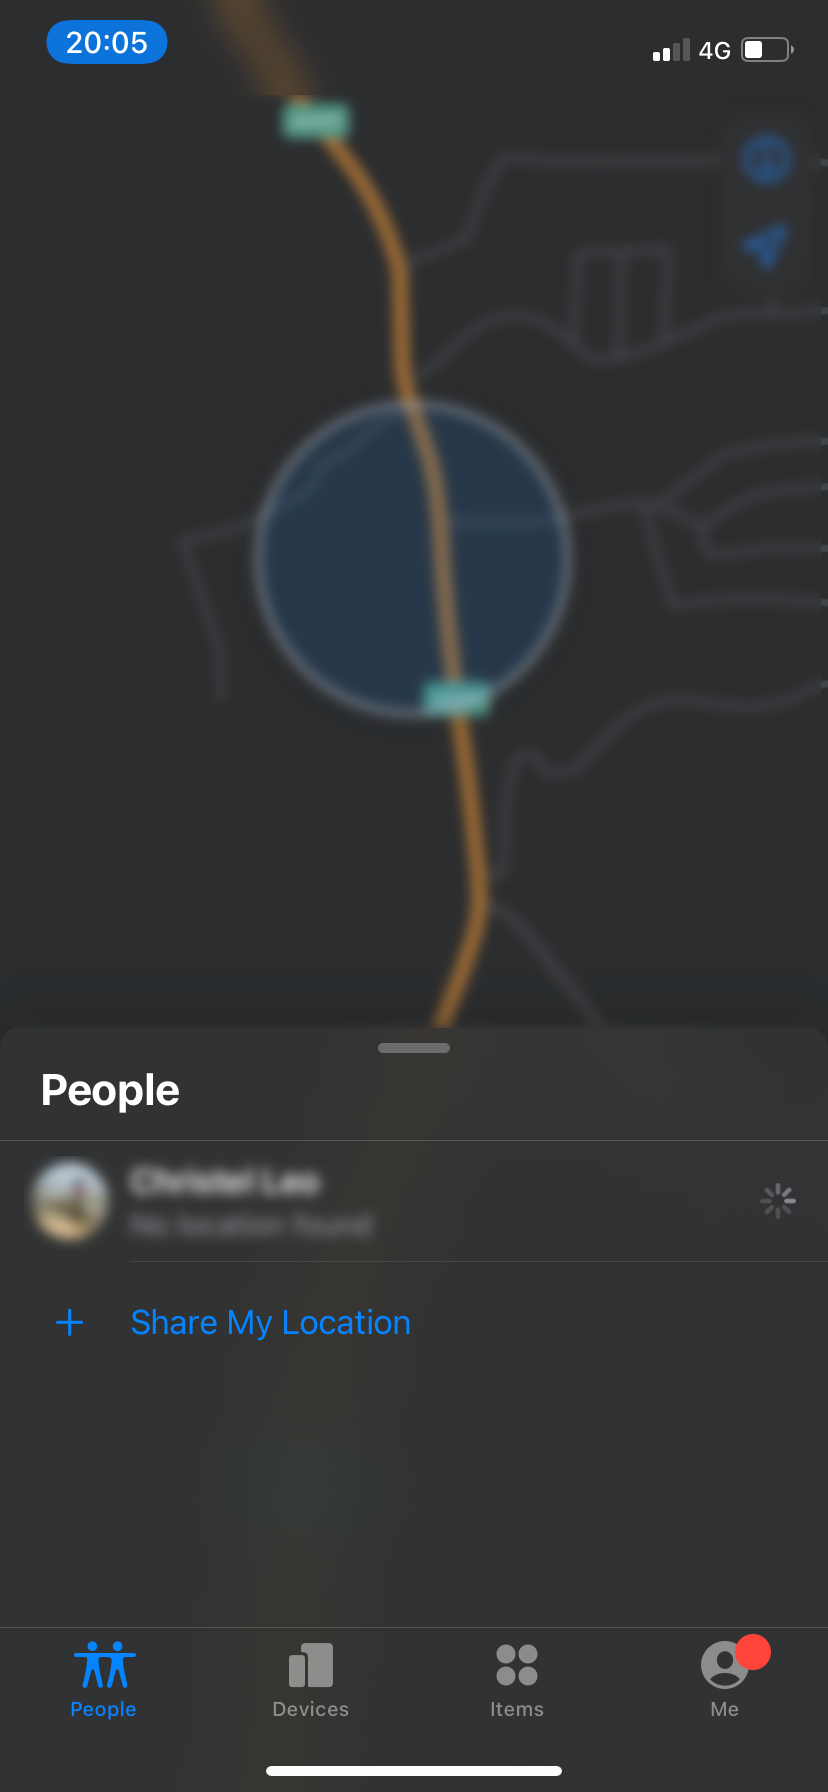 People tab in Find My.